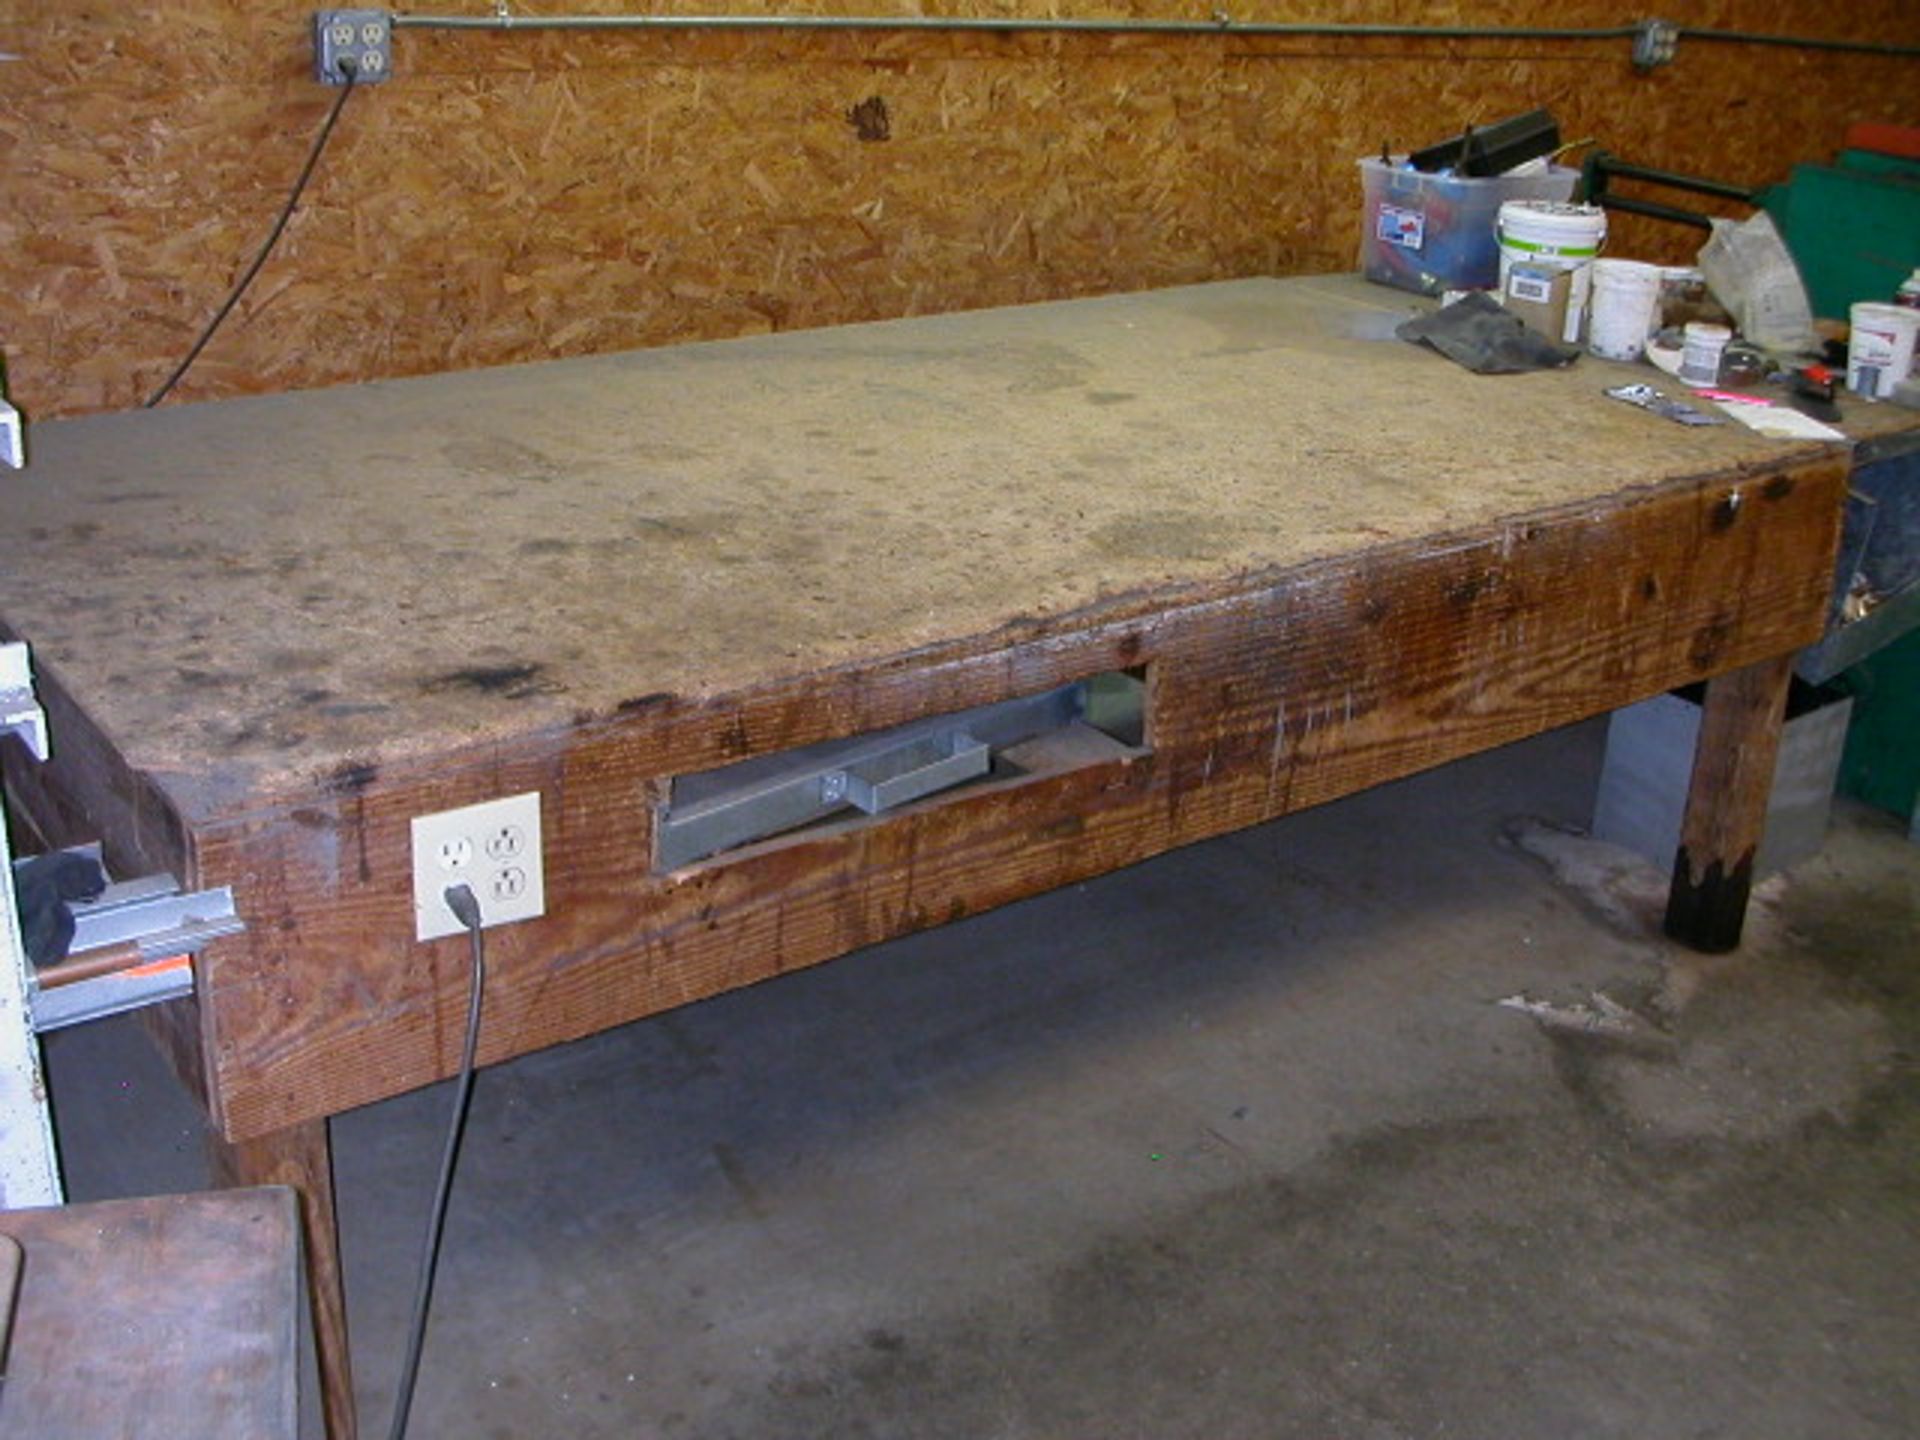 Wood Work Table w/elec. plug onboard (Used to manage Sheet Metal for 10' Duct Work)